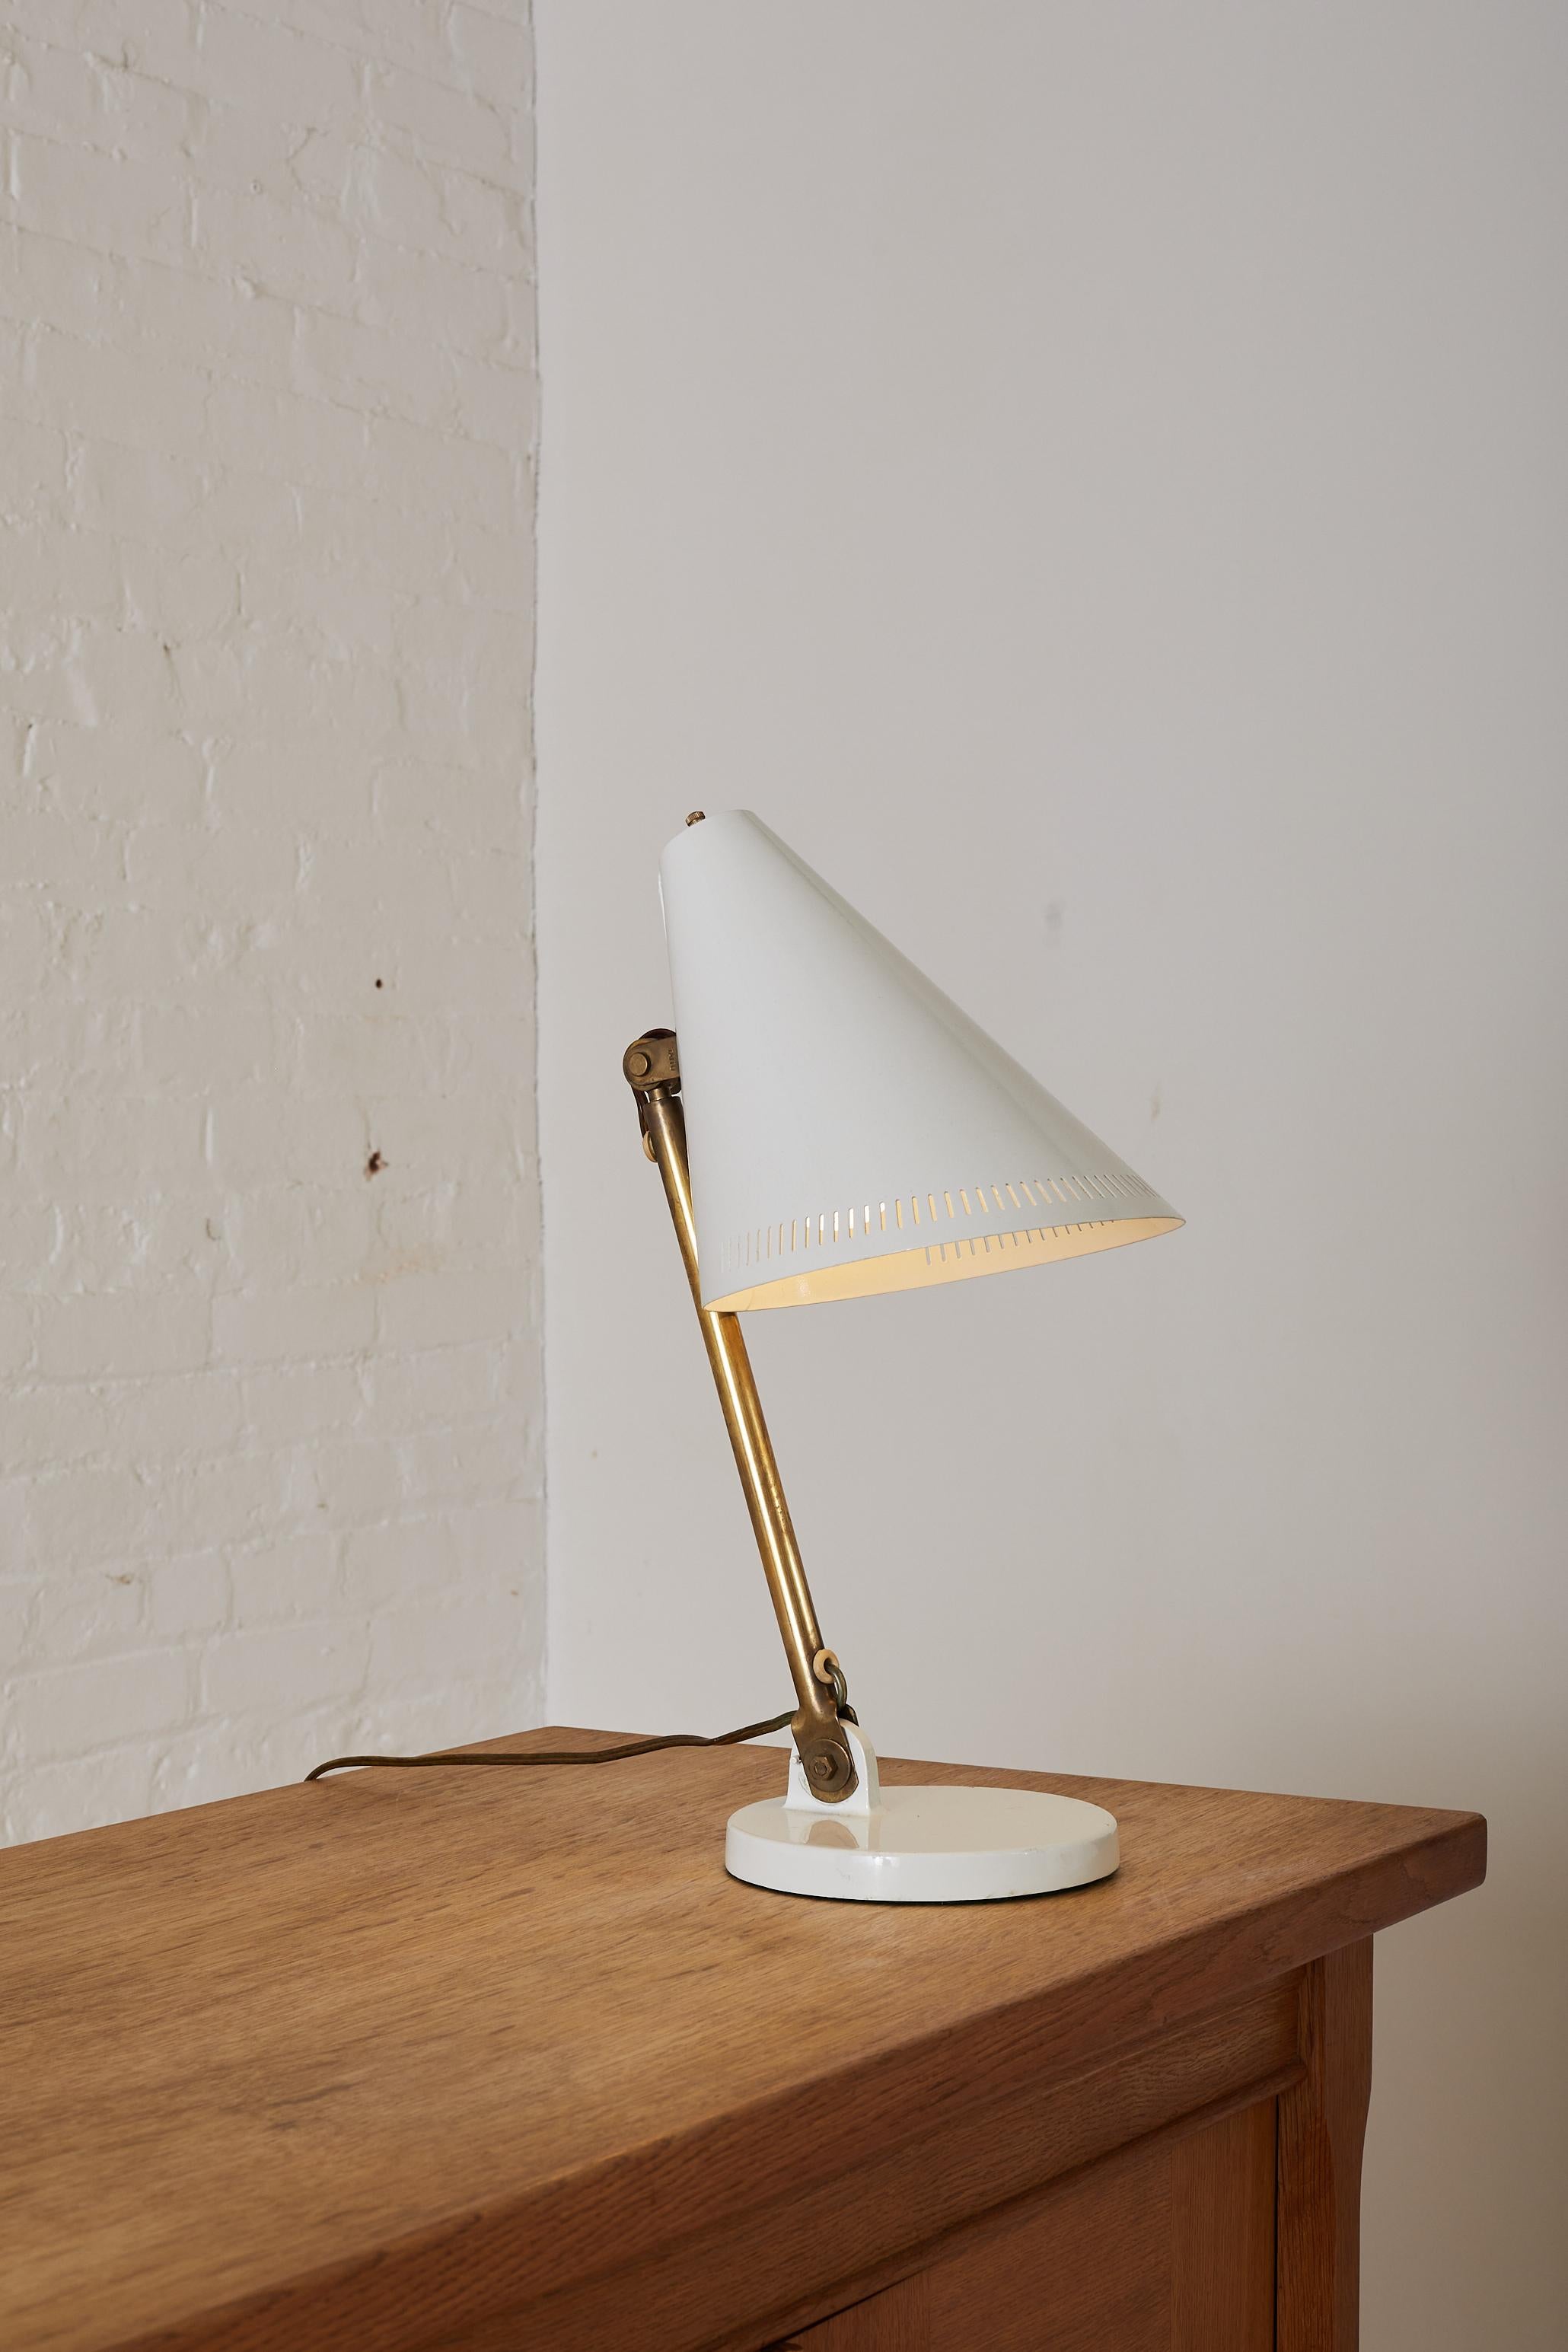 1950's Paavo Tynell for Taito Oy Desk Lamp with a white lacquered shade and brass detailing and an adjustable head. Signed 